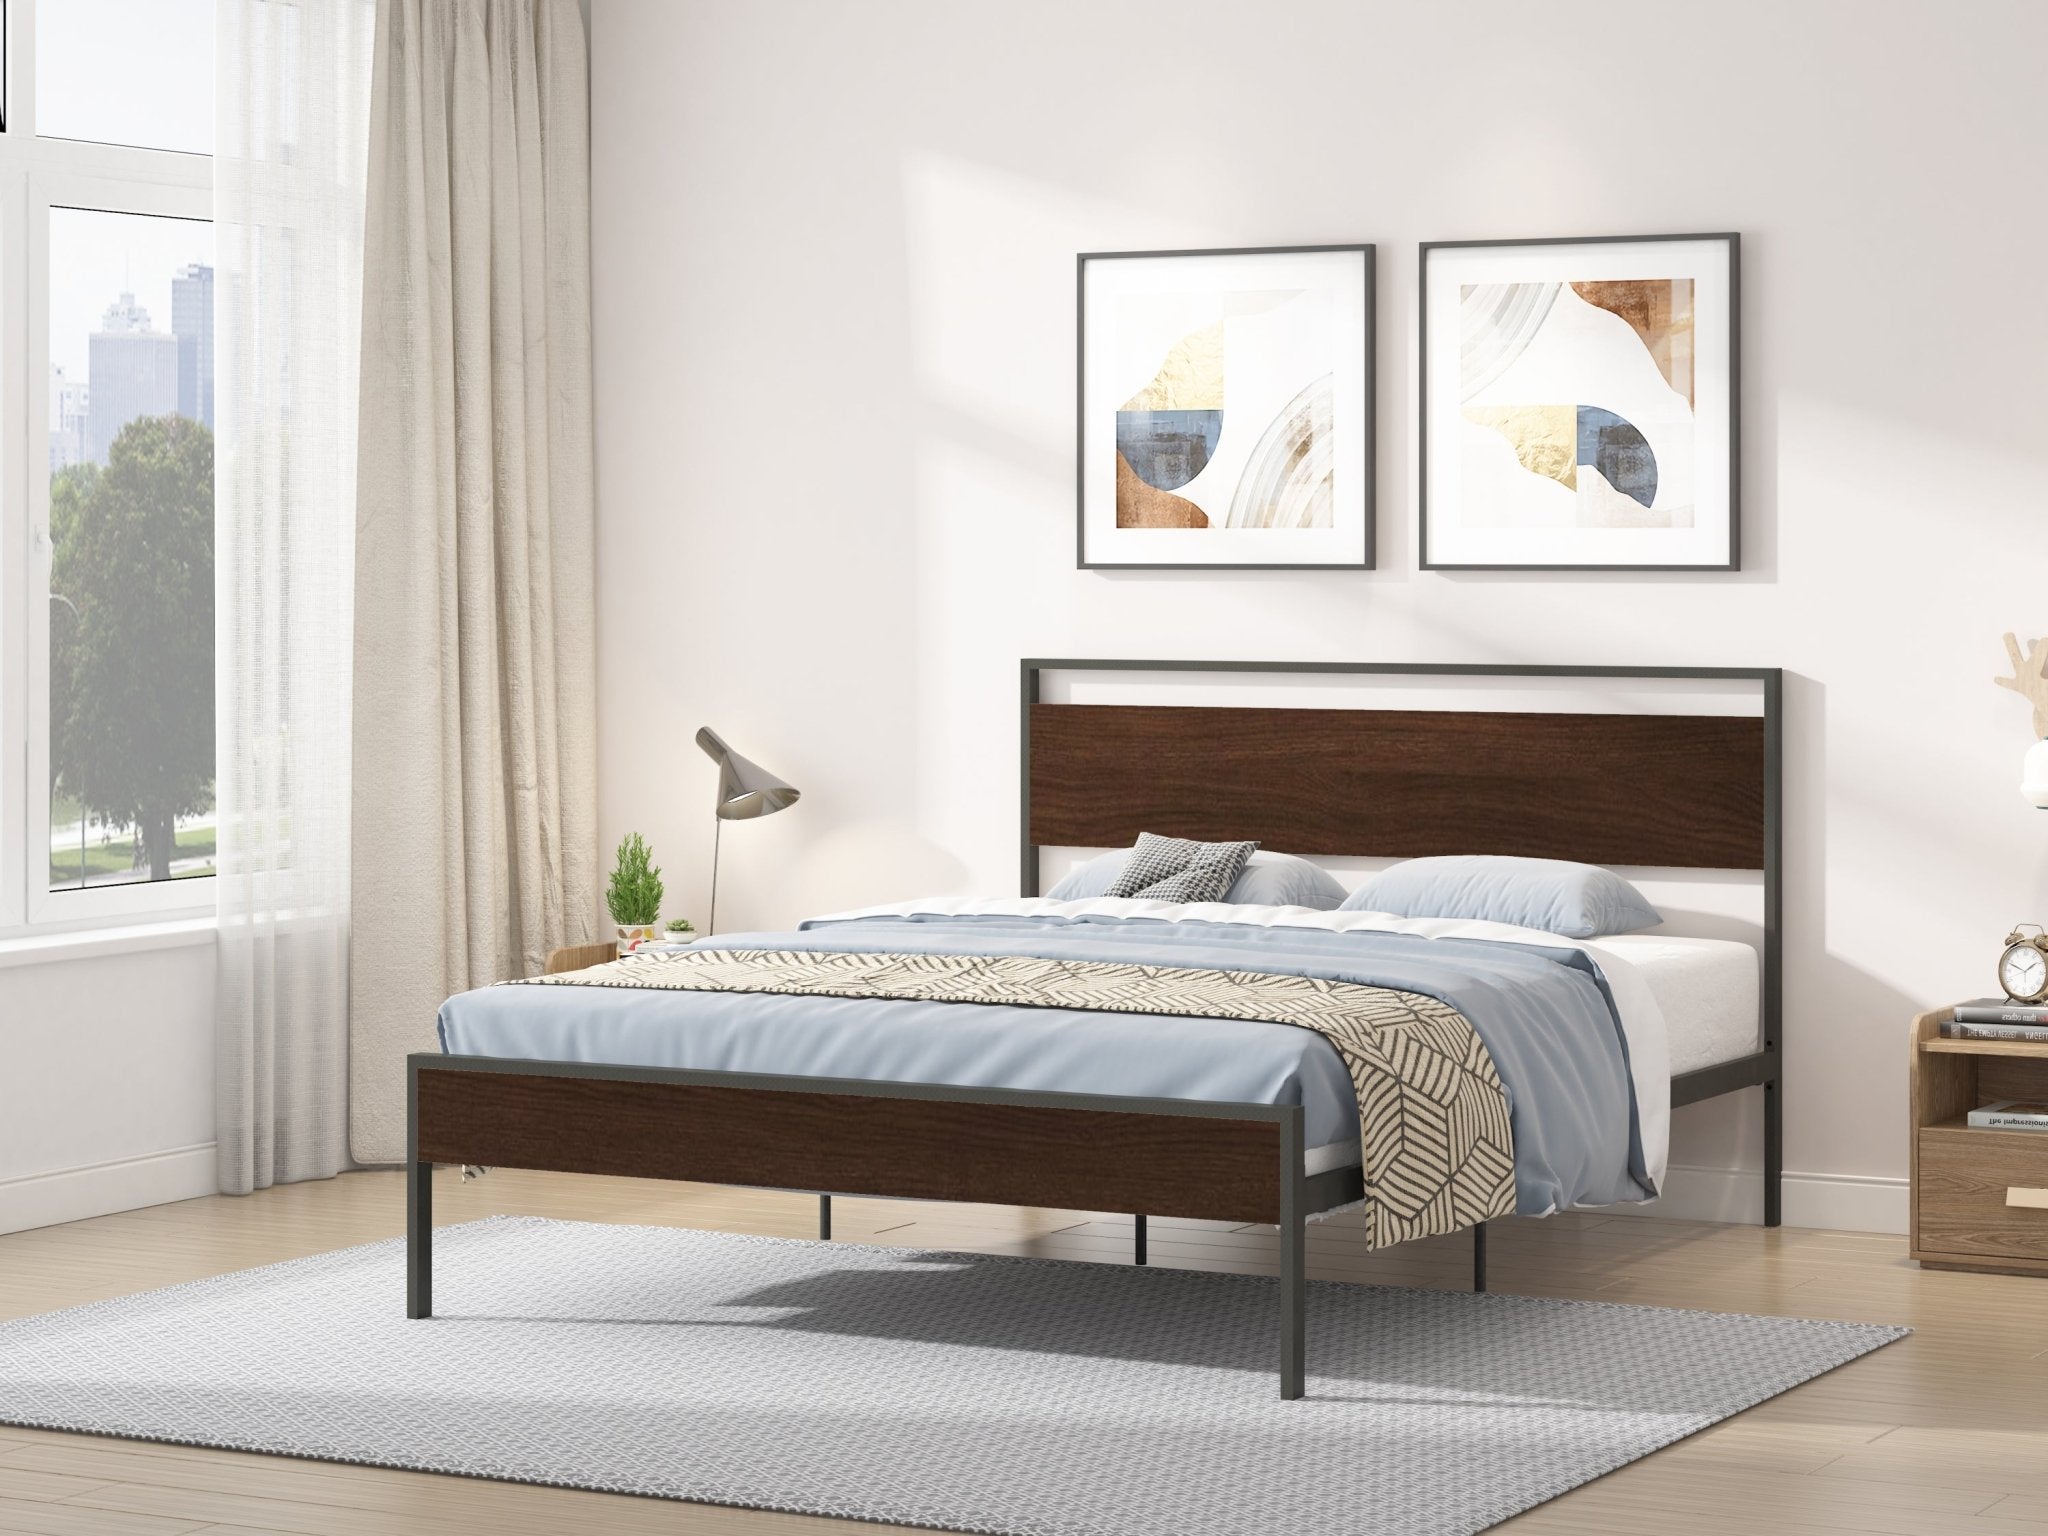 Ceres-Queen-Metal-Bed,-Black-with-Walnut-Wood-Headboard-&-Footboard-Beds-&-Bed-Frames